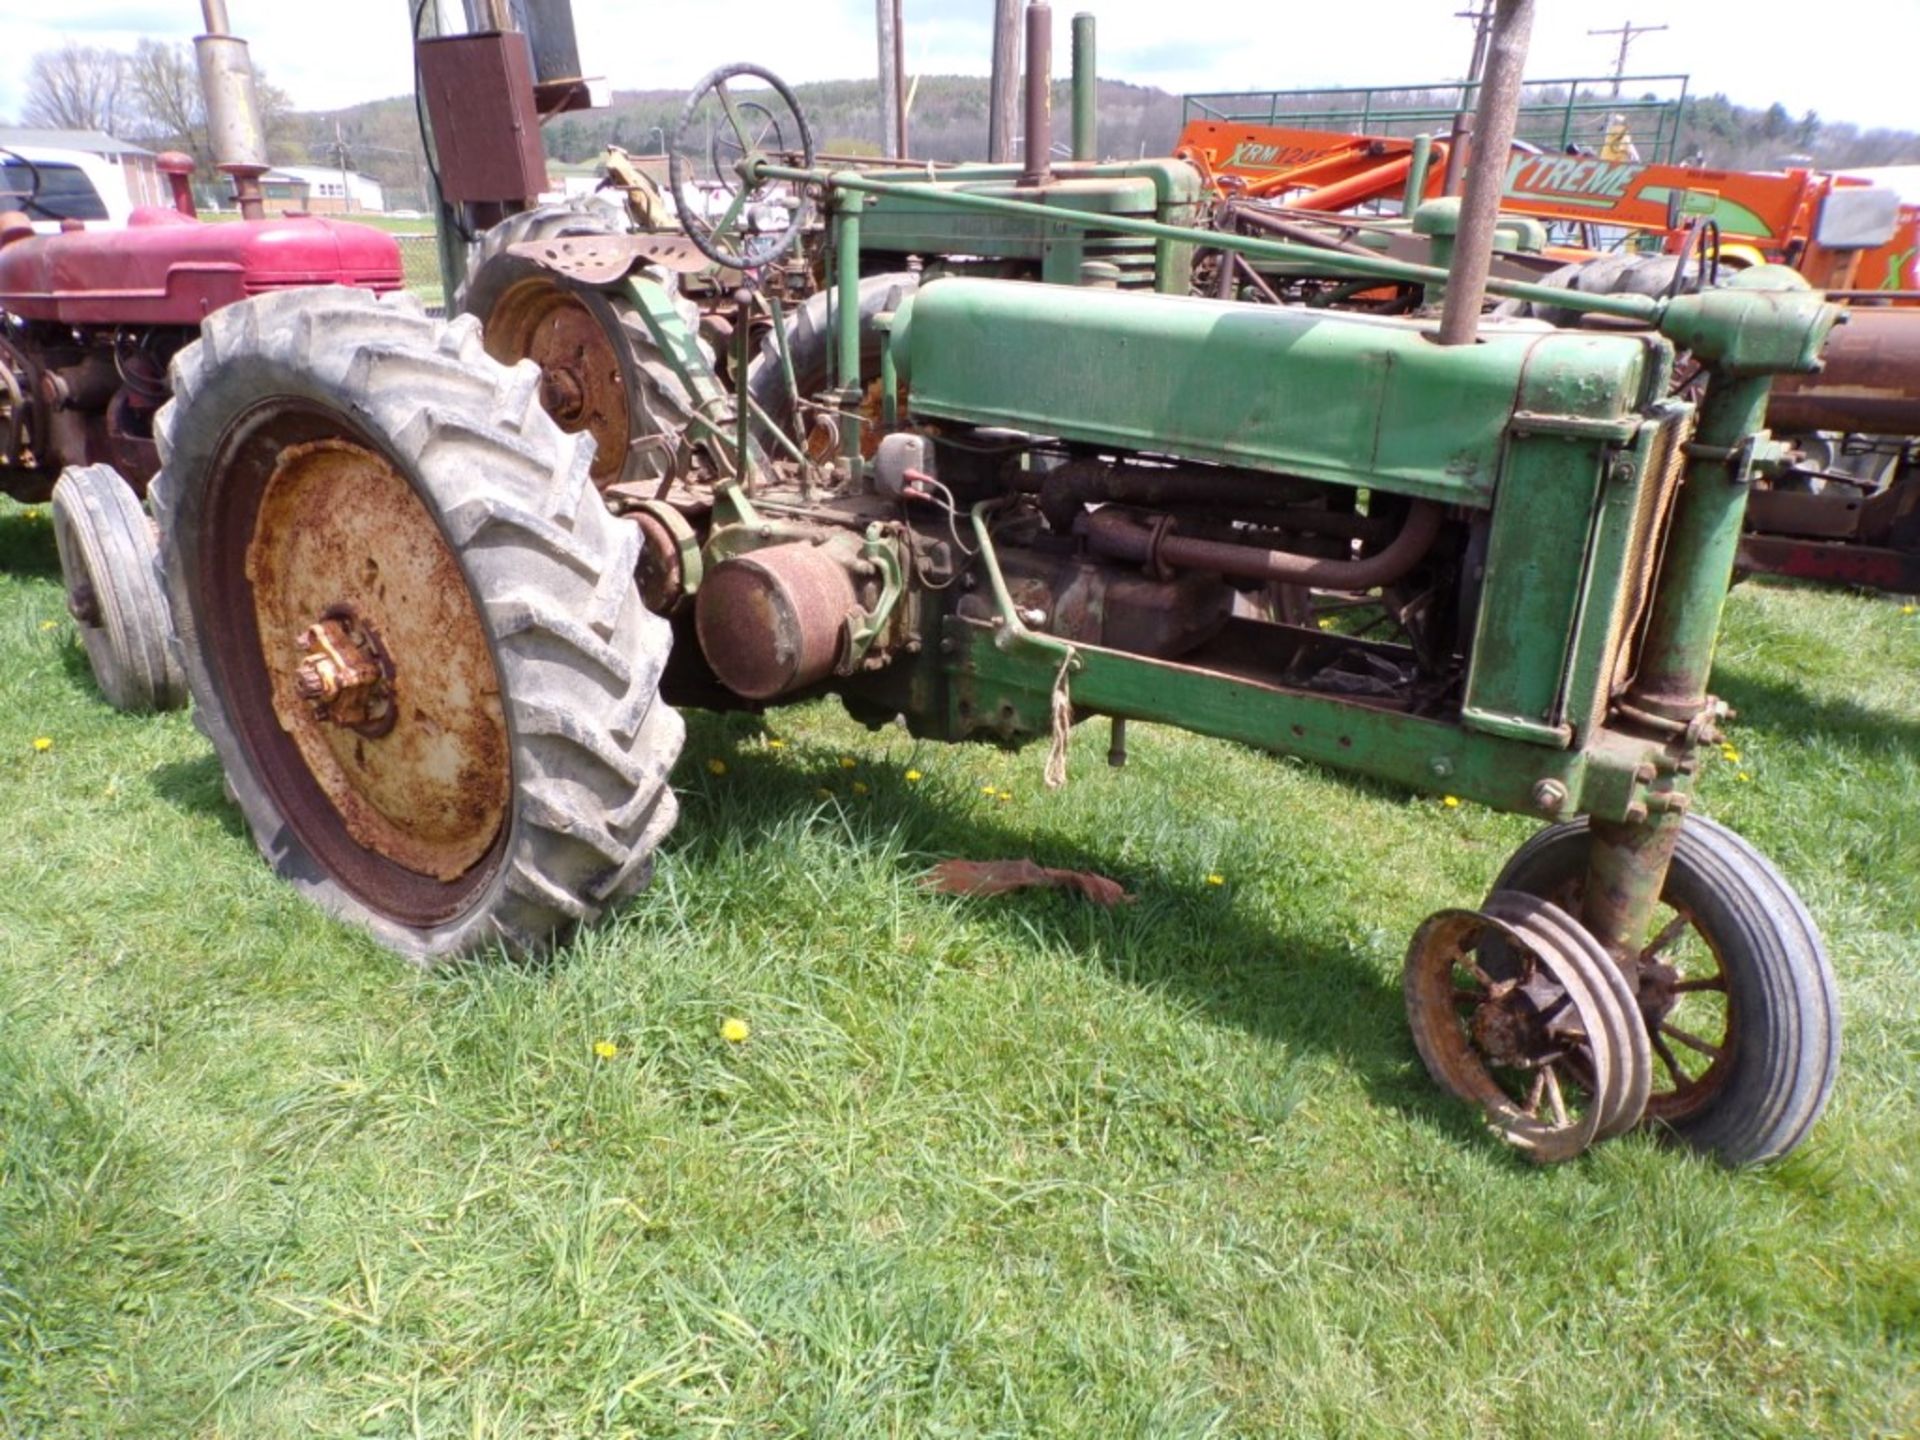 JD Unstyled B, NFE, Complete - Not Running, Needs Work (4310) - Image 2 of 2